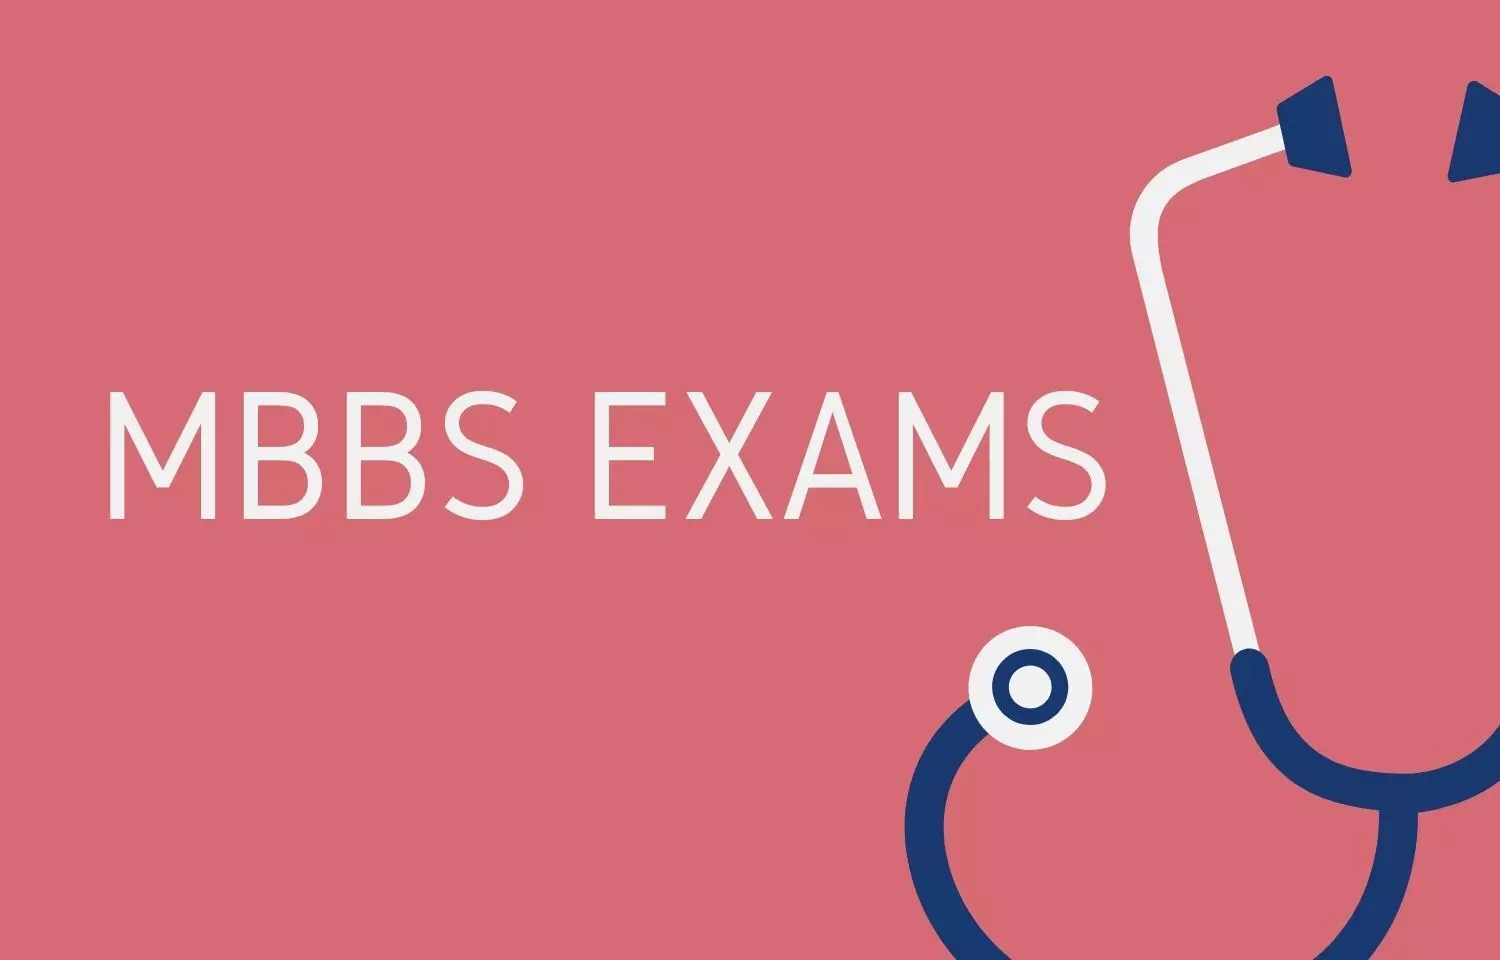 Upset over Preponement of RGUHS Final Year MBBS Exams, Students Demand Revised Schedule